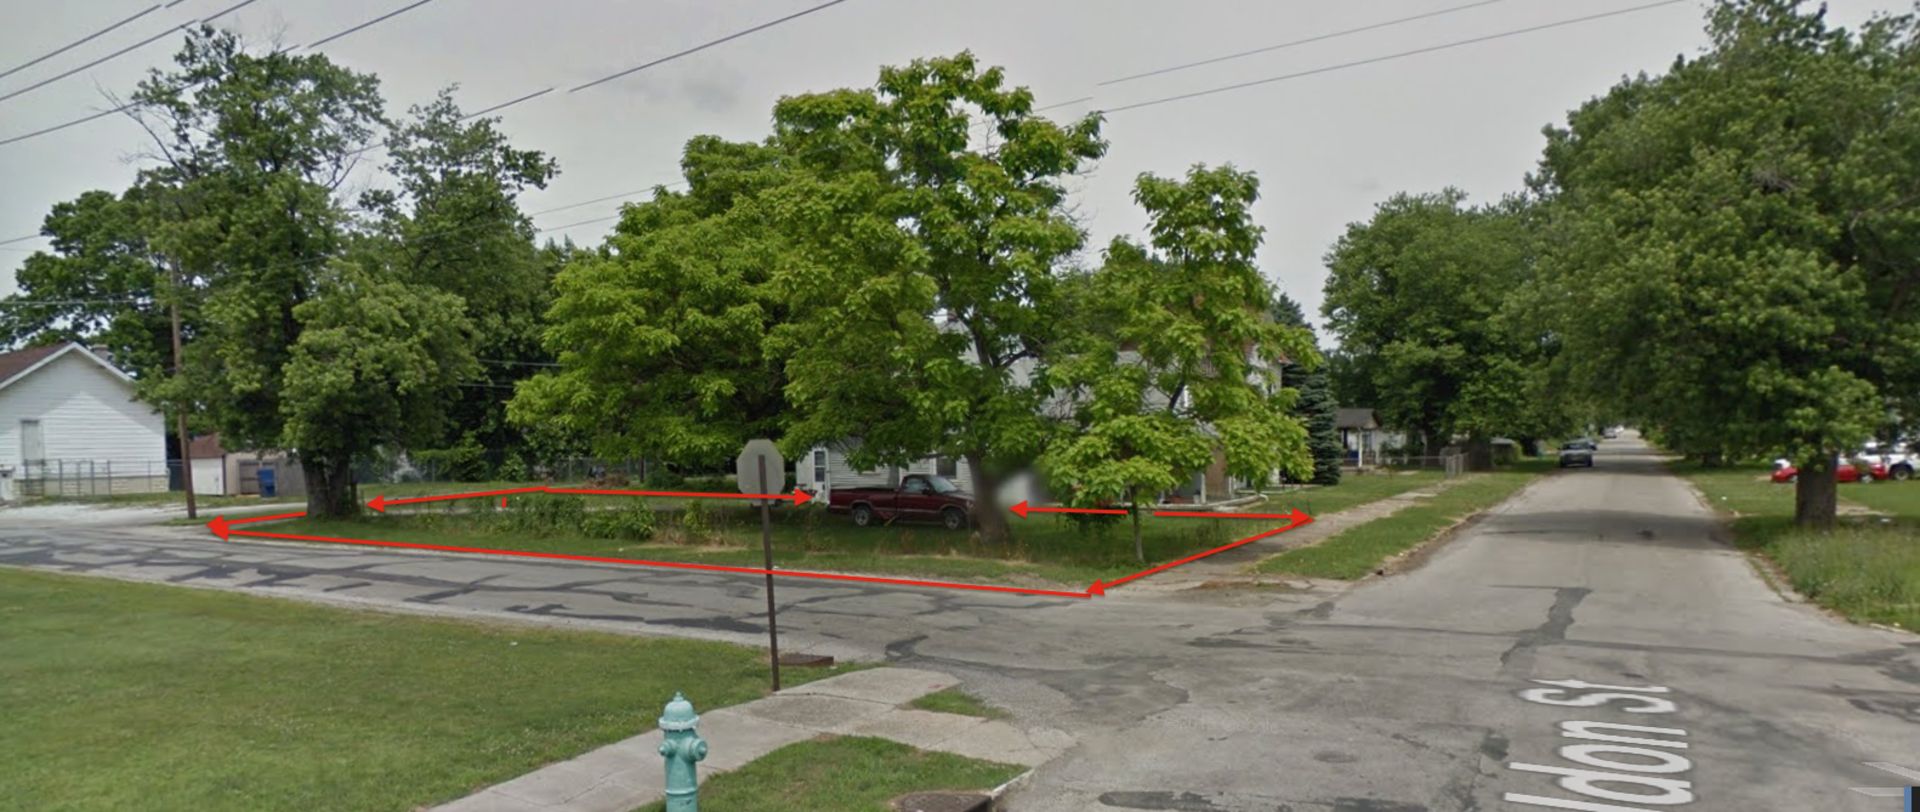 2202 SHELDON ST, INDIANAPOLIS, INDIANA 46218   NICE RESIDENTIAL PLOT OF LAND WITH MATURE TREES! GOOD